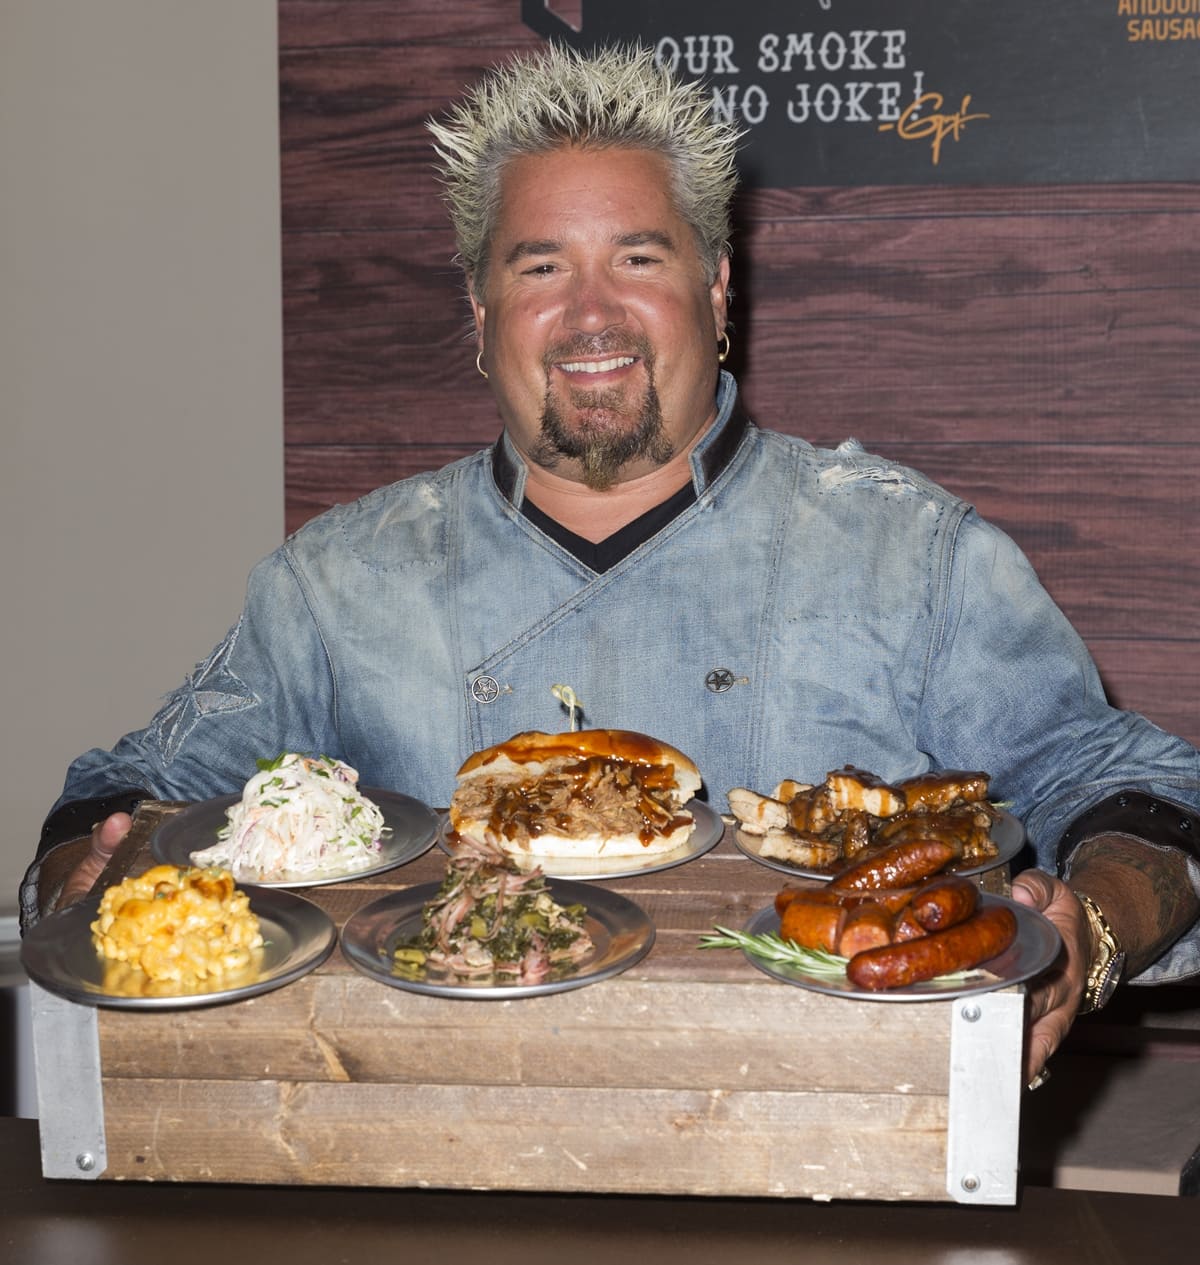 One of the world's most recognizable and richest celebrity chefs, Guy Ramsay Fieri owns several restaurants, has published numerous cookbooks, and is an Emmy Award-winning television presenter